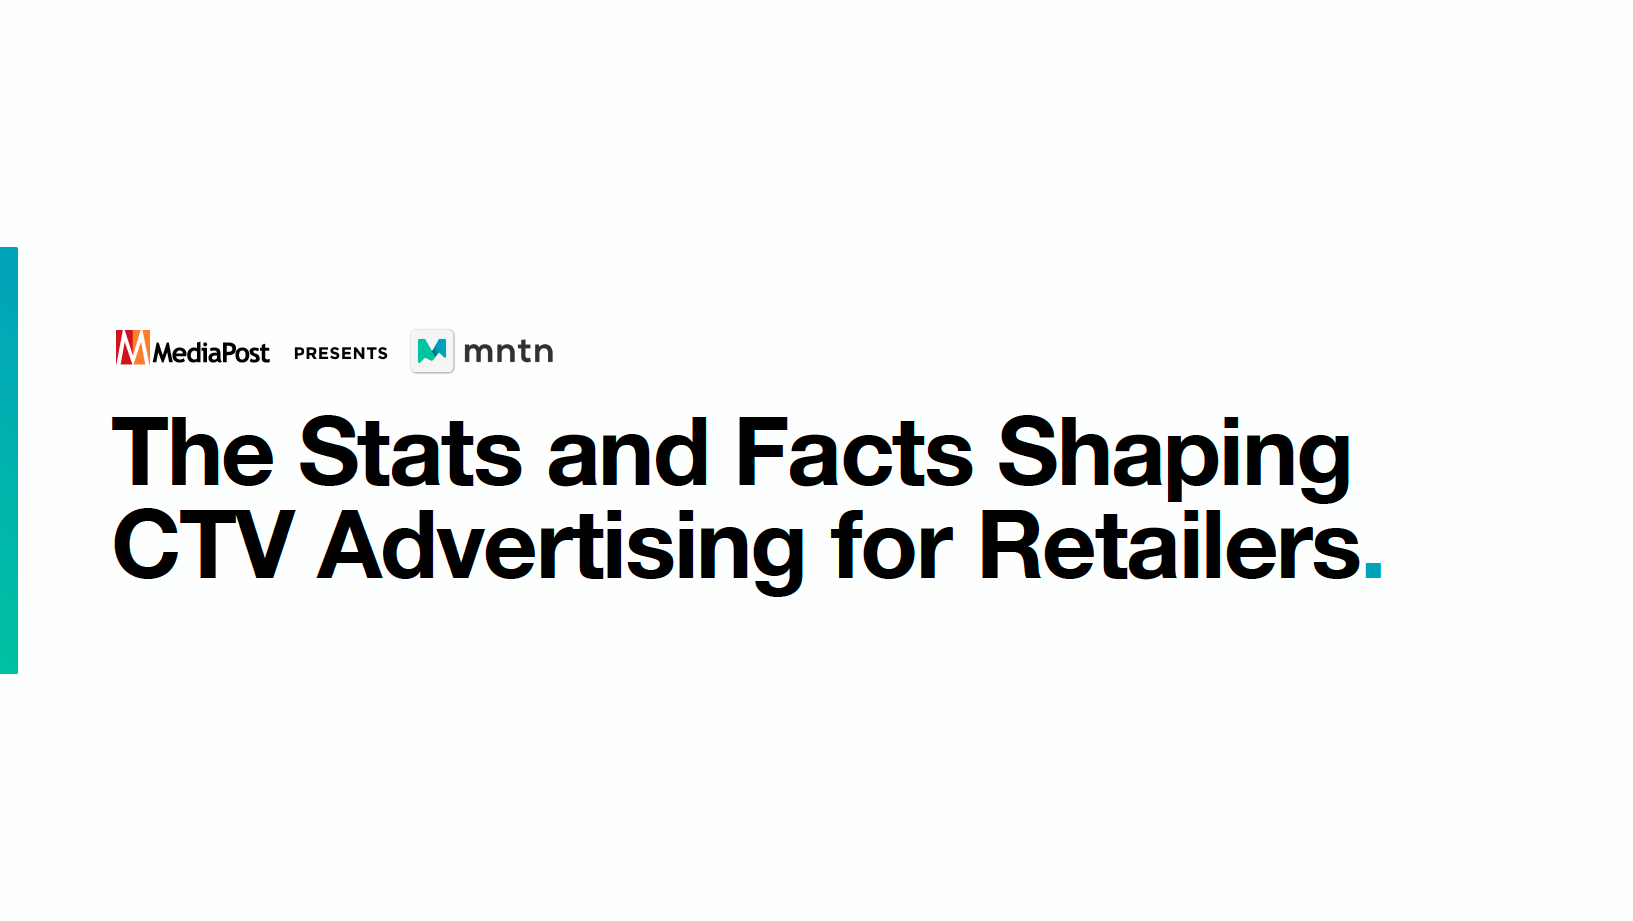 The Stats and Facts Shaping CTV Advertising for Retailers